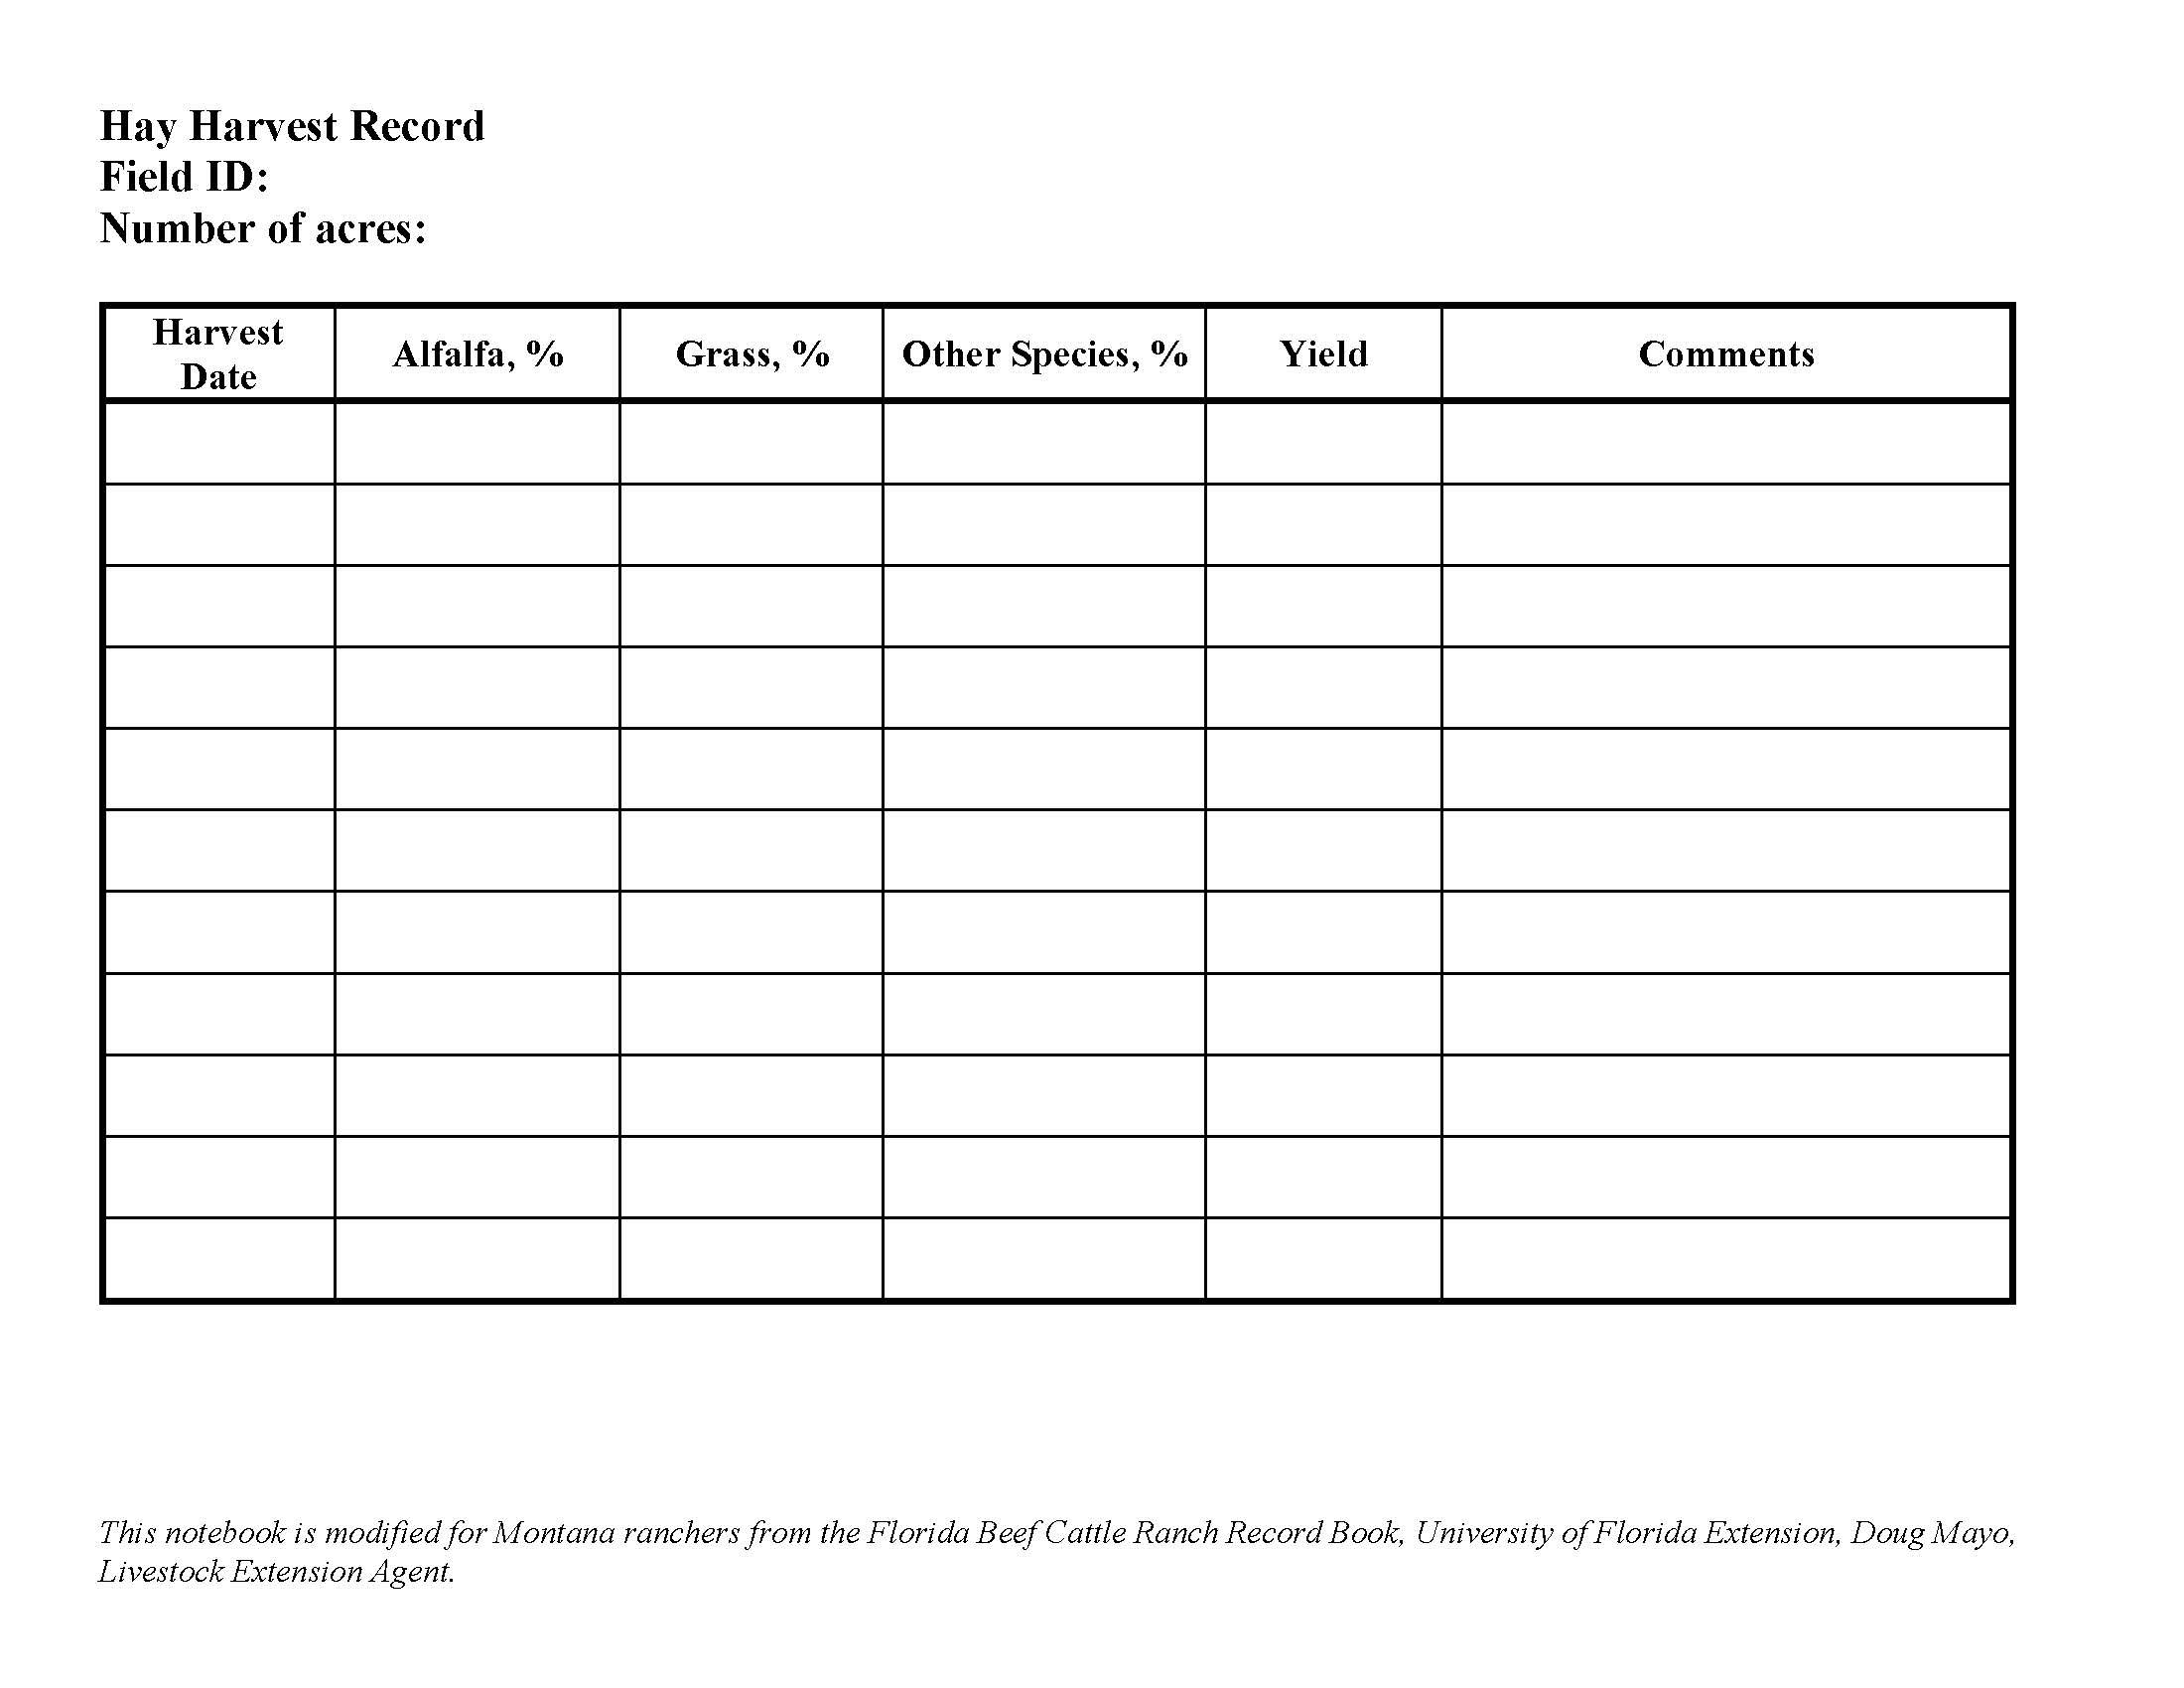 A sample table for keeping records on hay harvesting. Another information tool used for the rancher notebook.